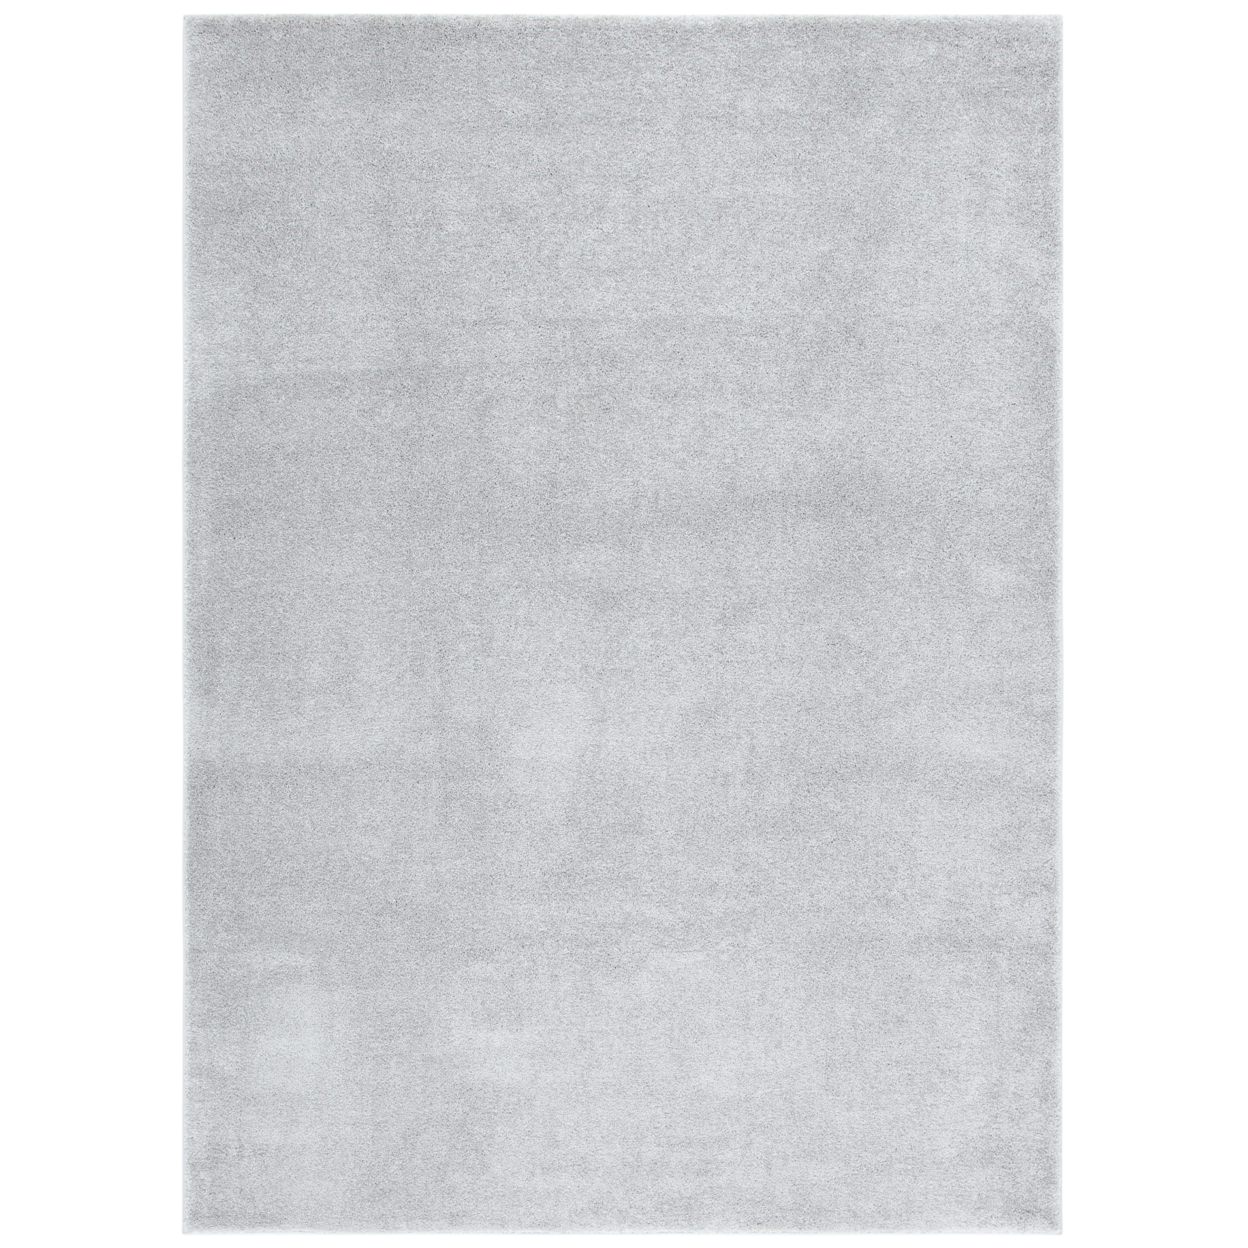 SAFAVIEH Pattern And Solid PNS320-4424 Light Grey Rug - 3' 3 X 5' 3